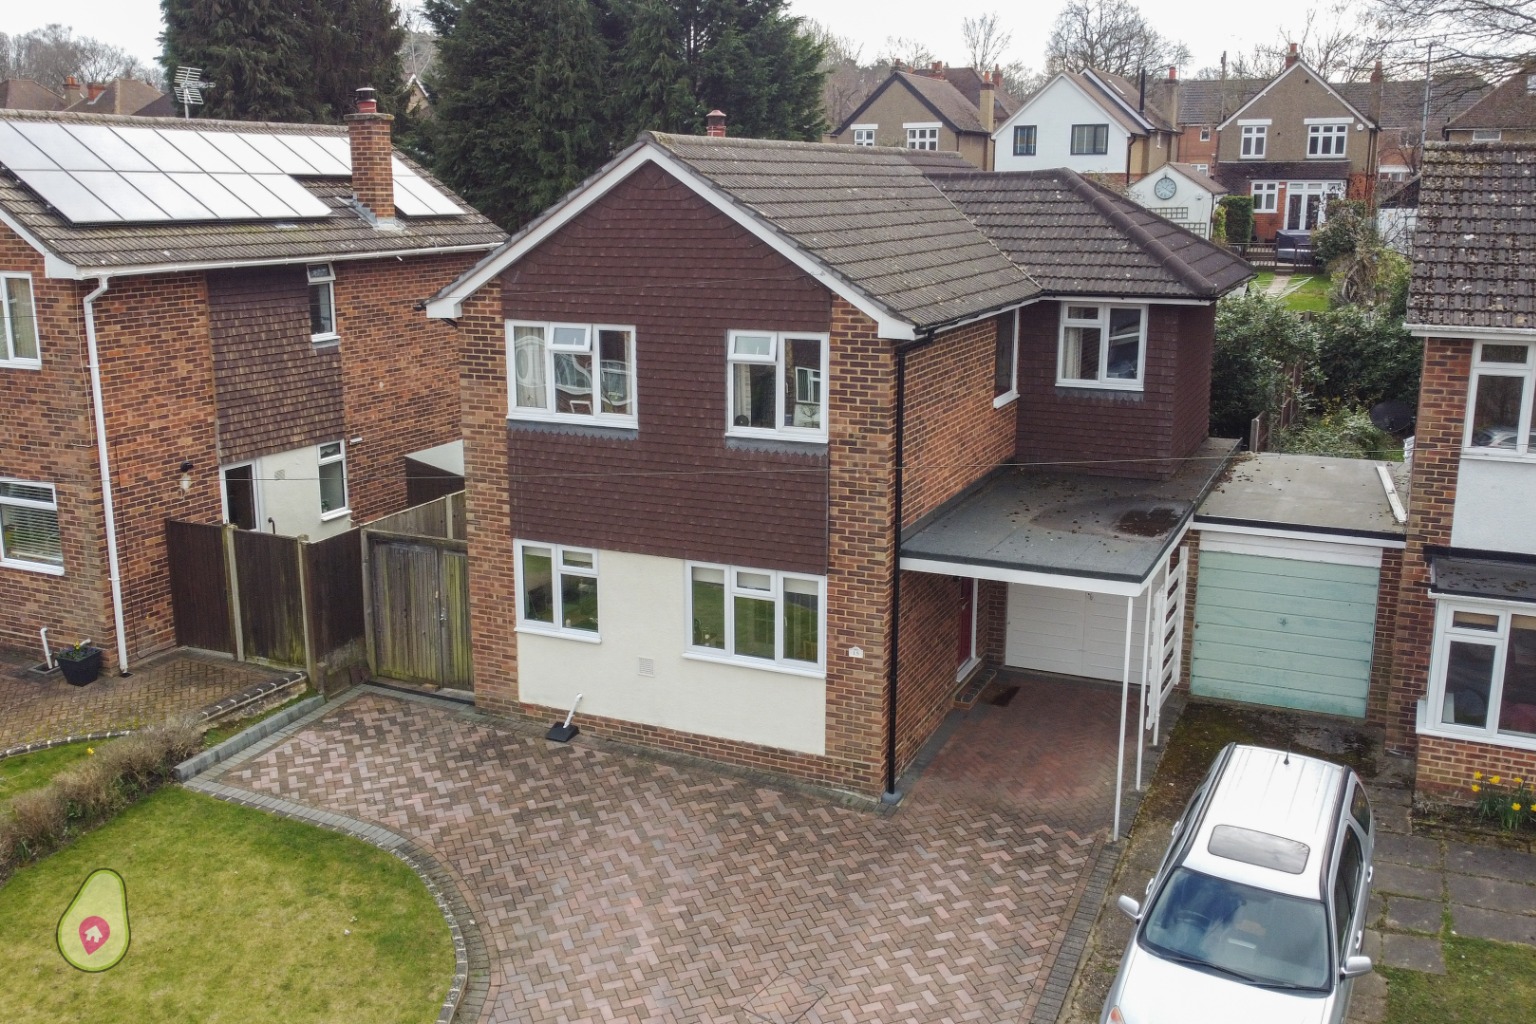 Located less than a mile away from Camberley town centre and train station is this extended and modernised family home.